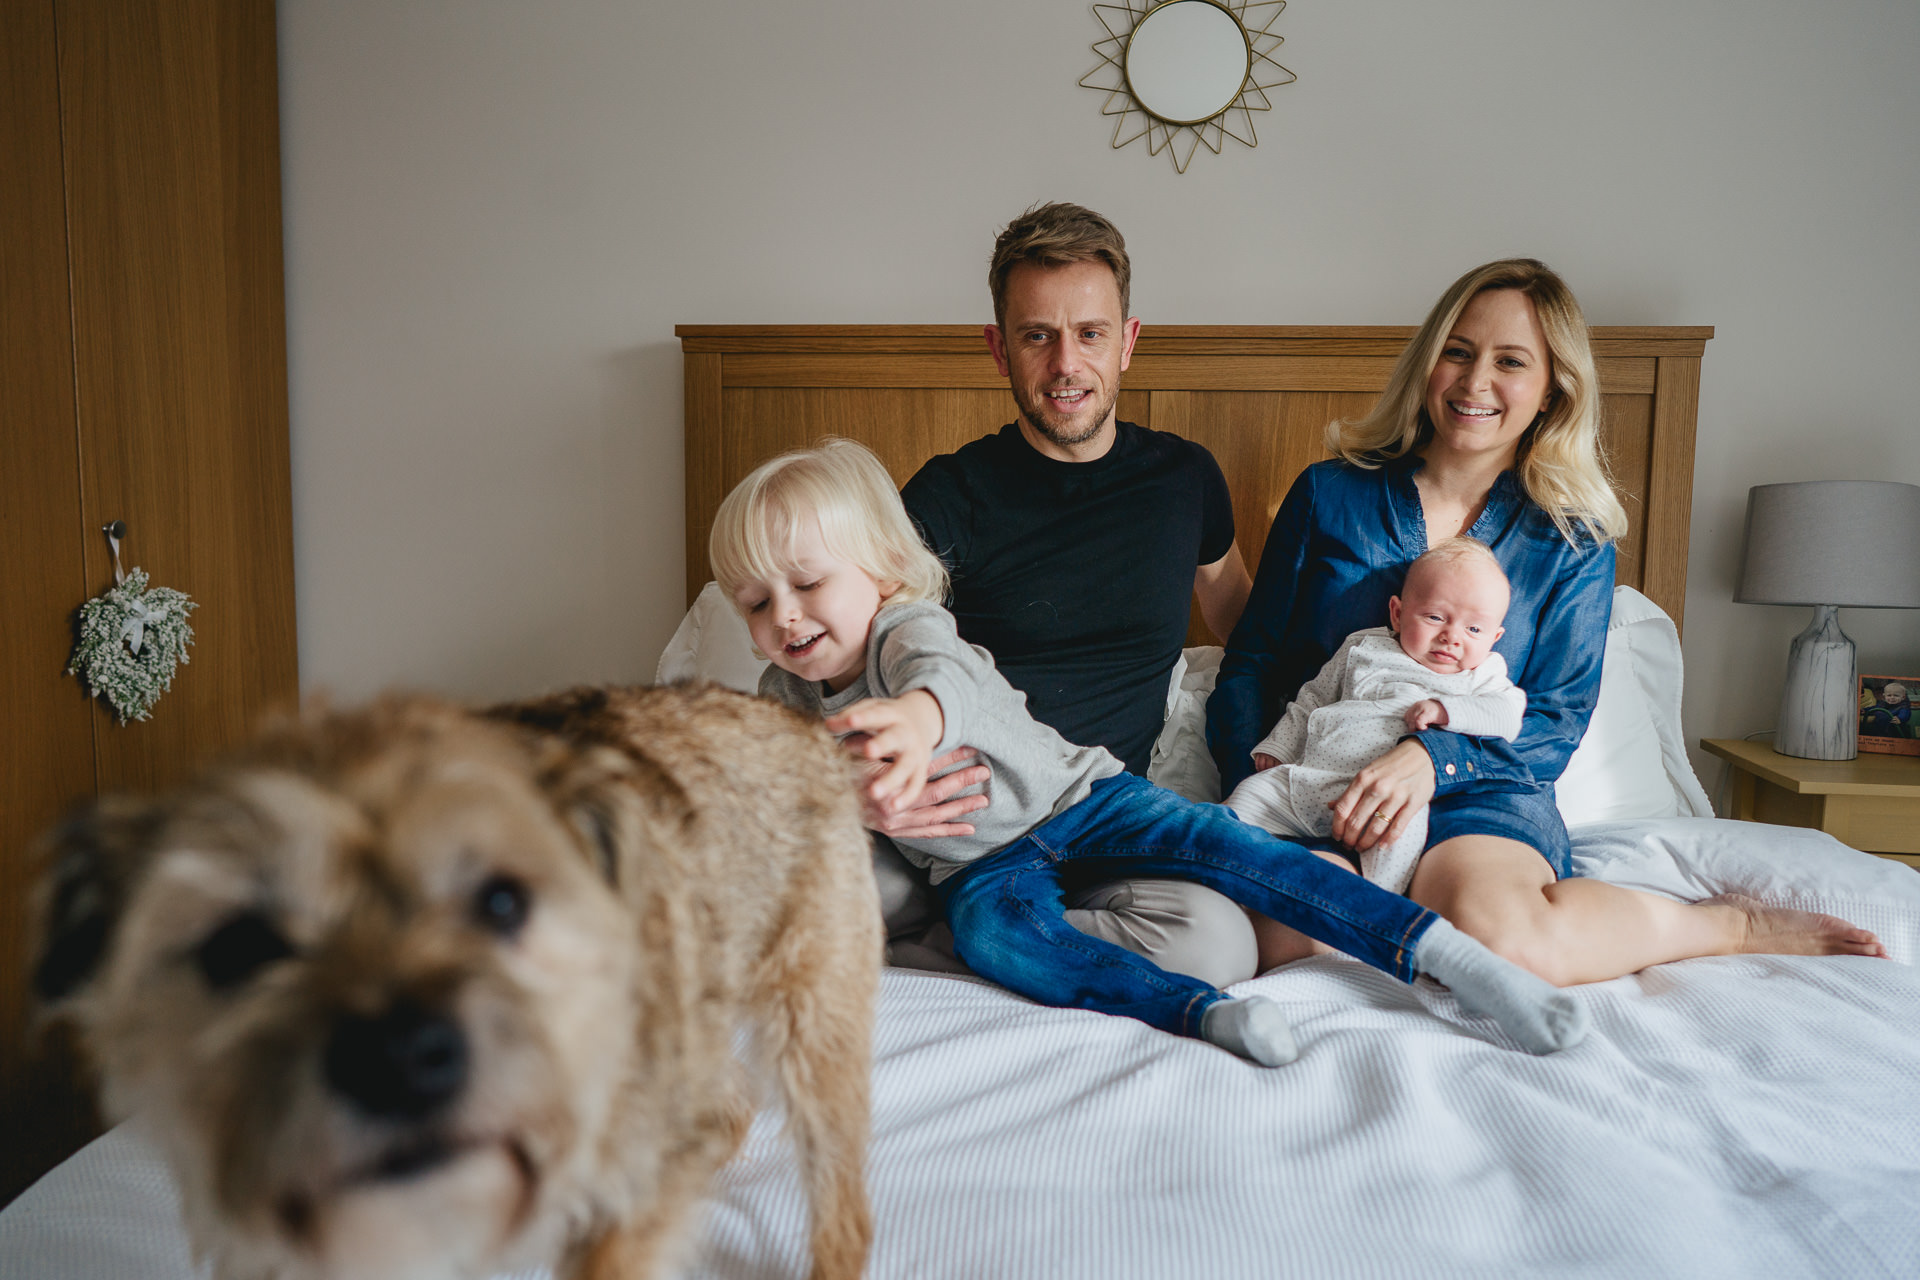 Dorset family photography - a family sitting on a bed with a border terrier photobombing the image